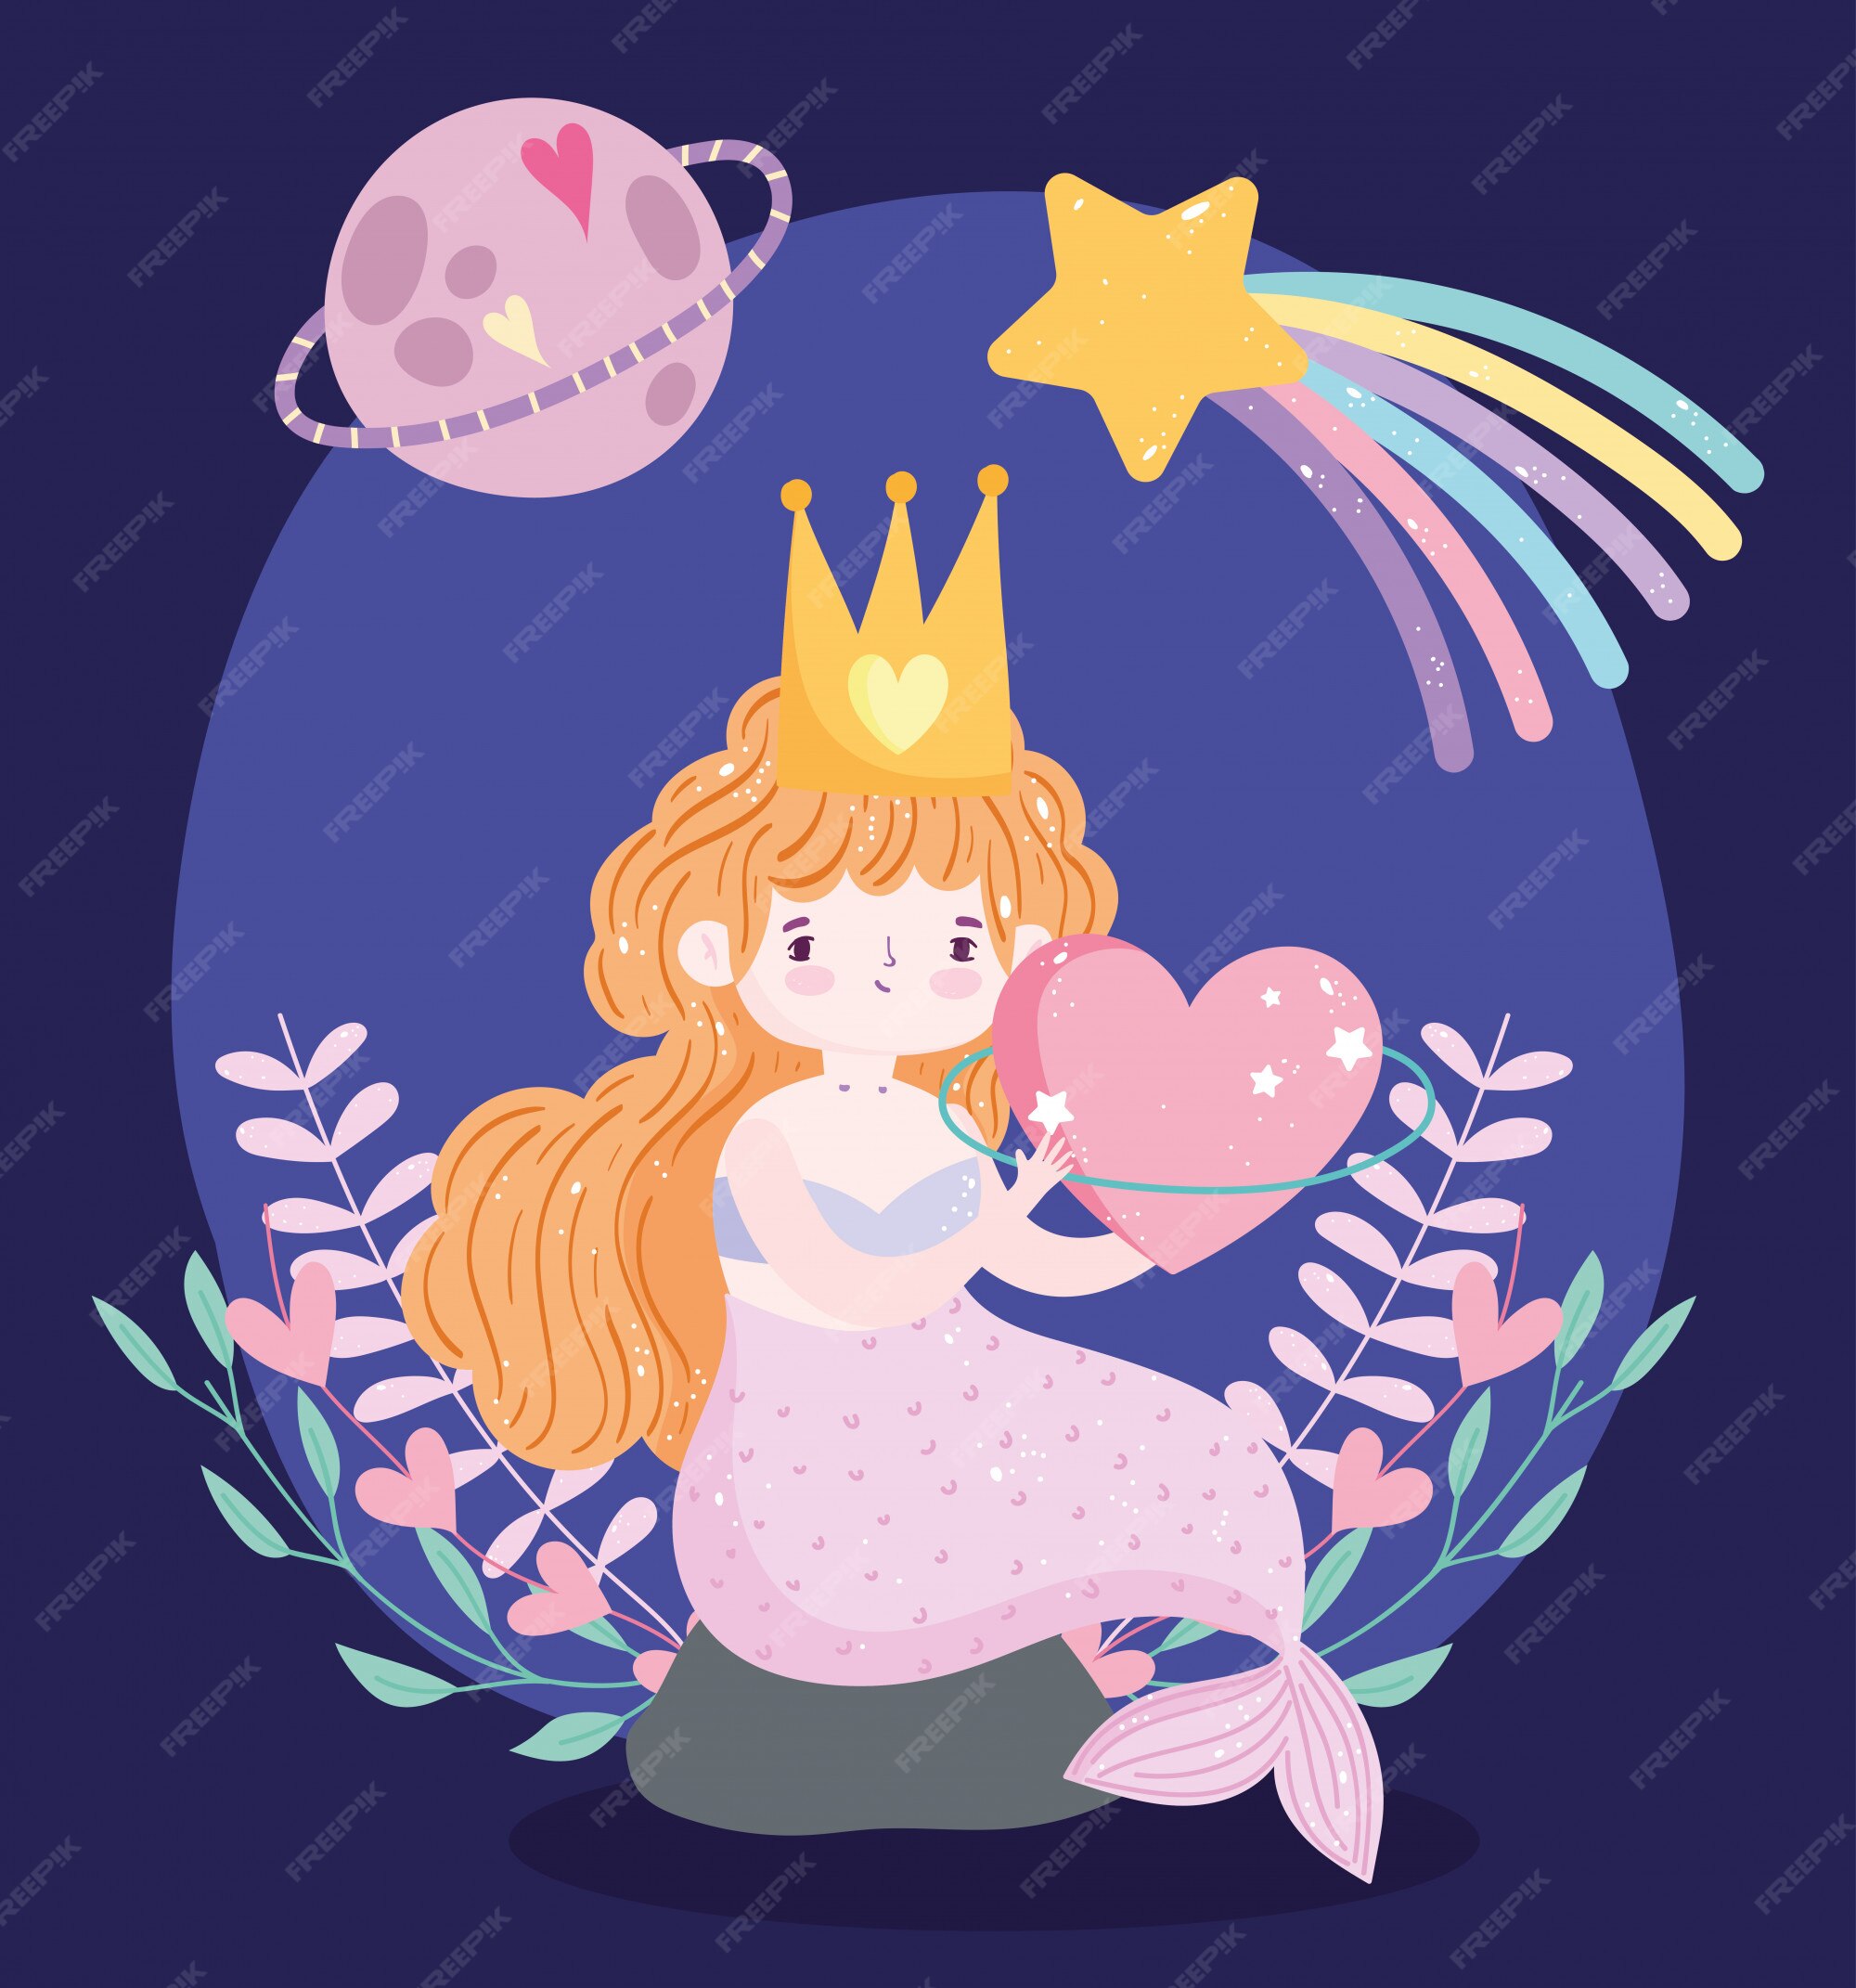 Premium Vector | Cute little mermaid with pink tail sitting on rock with  star planet fantasy dream cartoon